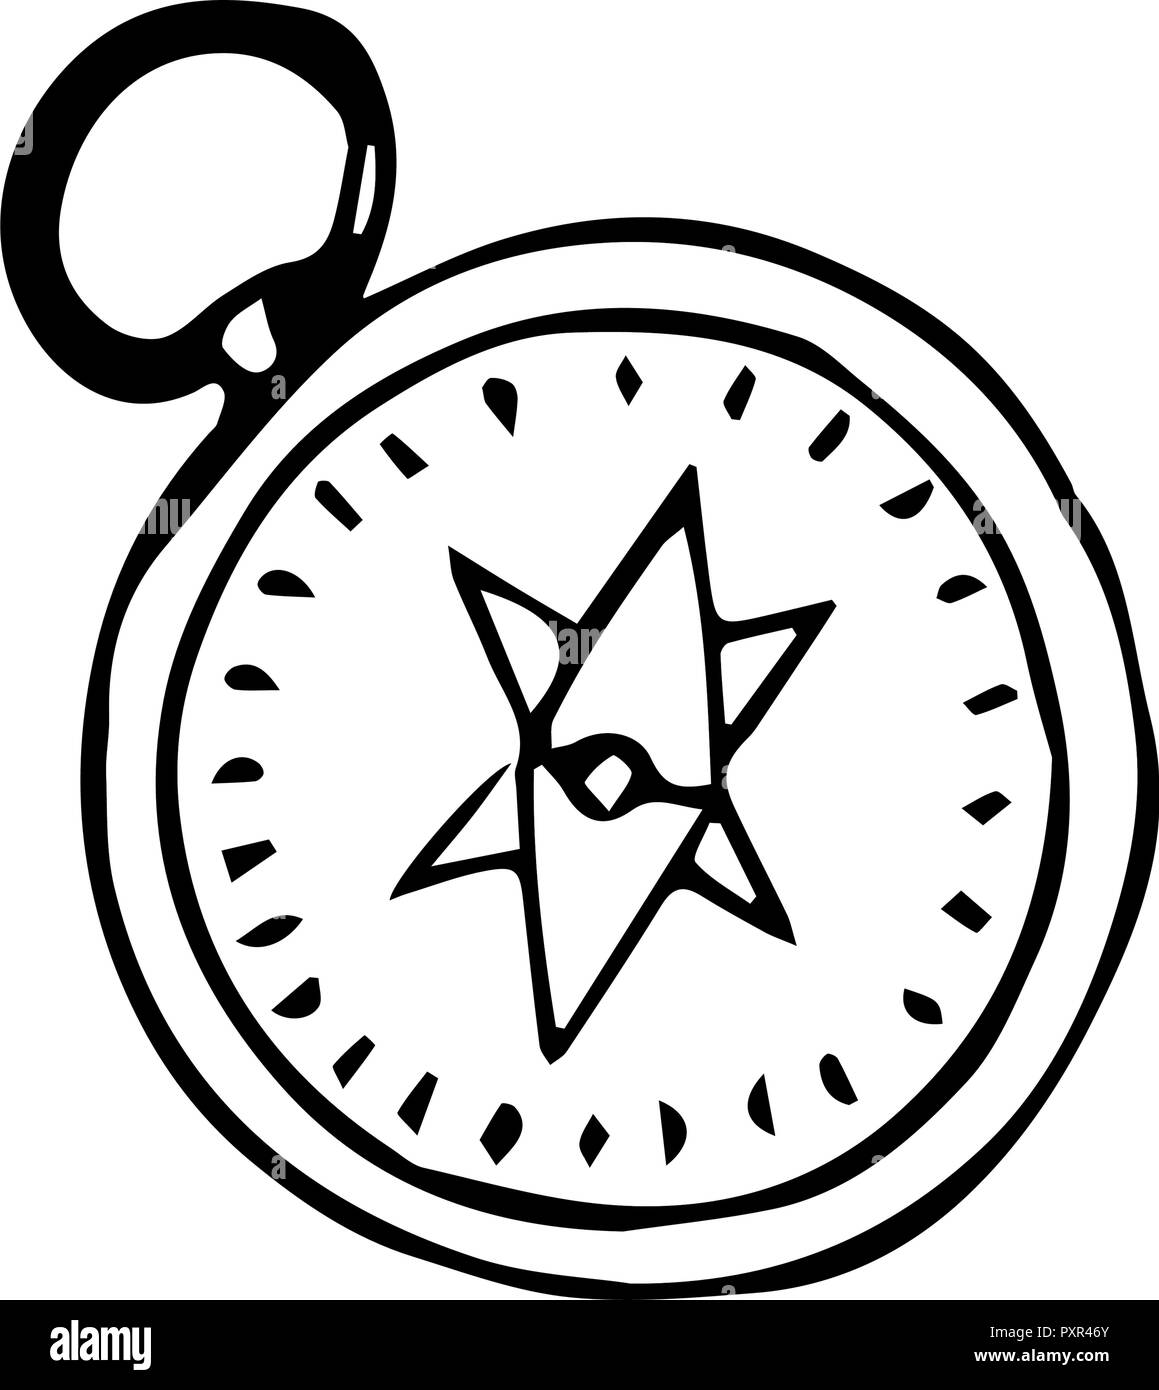 Free hand drawing of a compass. Simple vector design element. Stock Vector